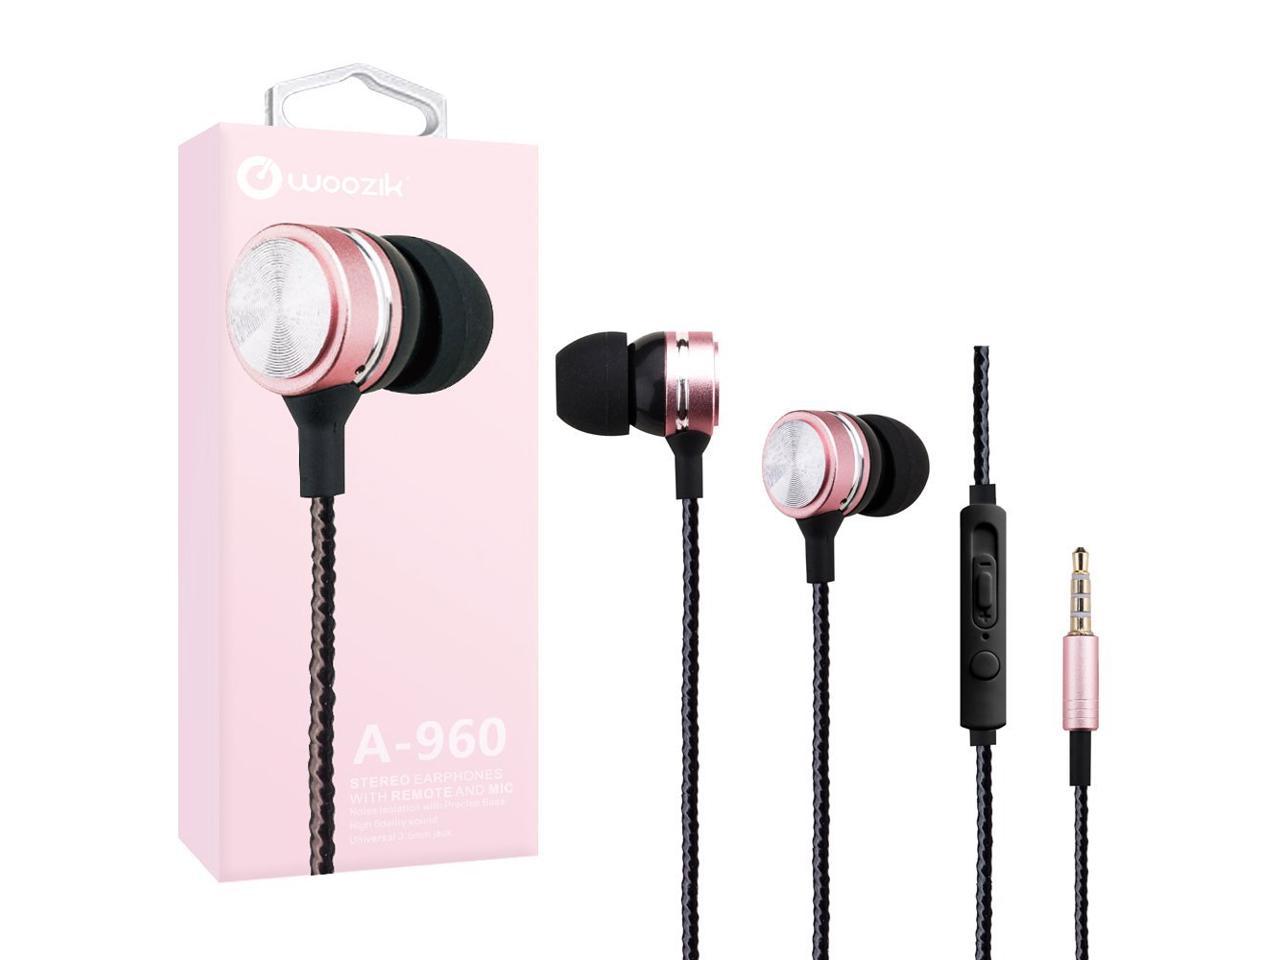 Woozik A960 Metal In-Ear Bass Headphones with Microphone & In-Line Volume Control Music Stereo Earbuds Headset